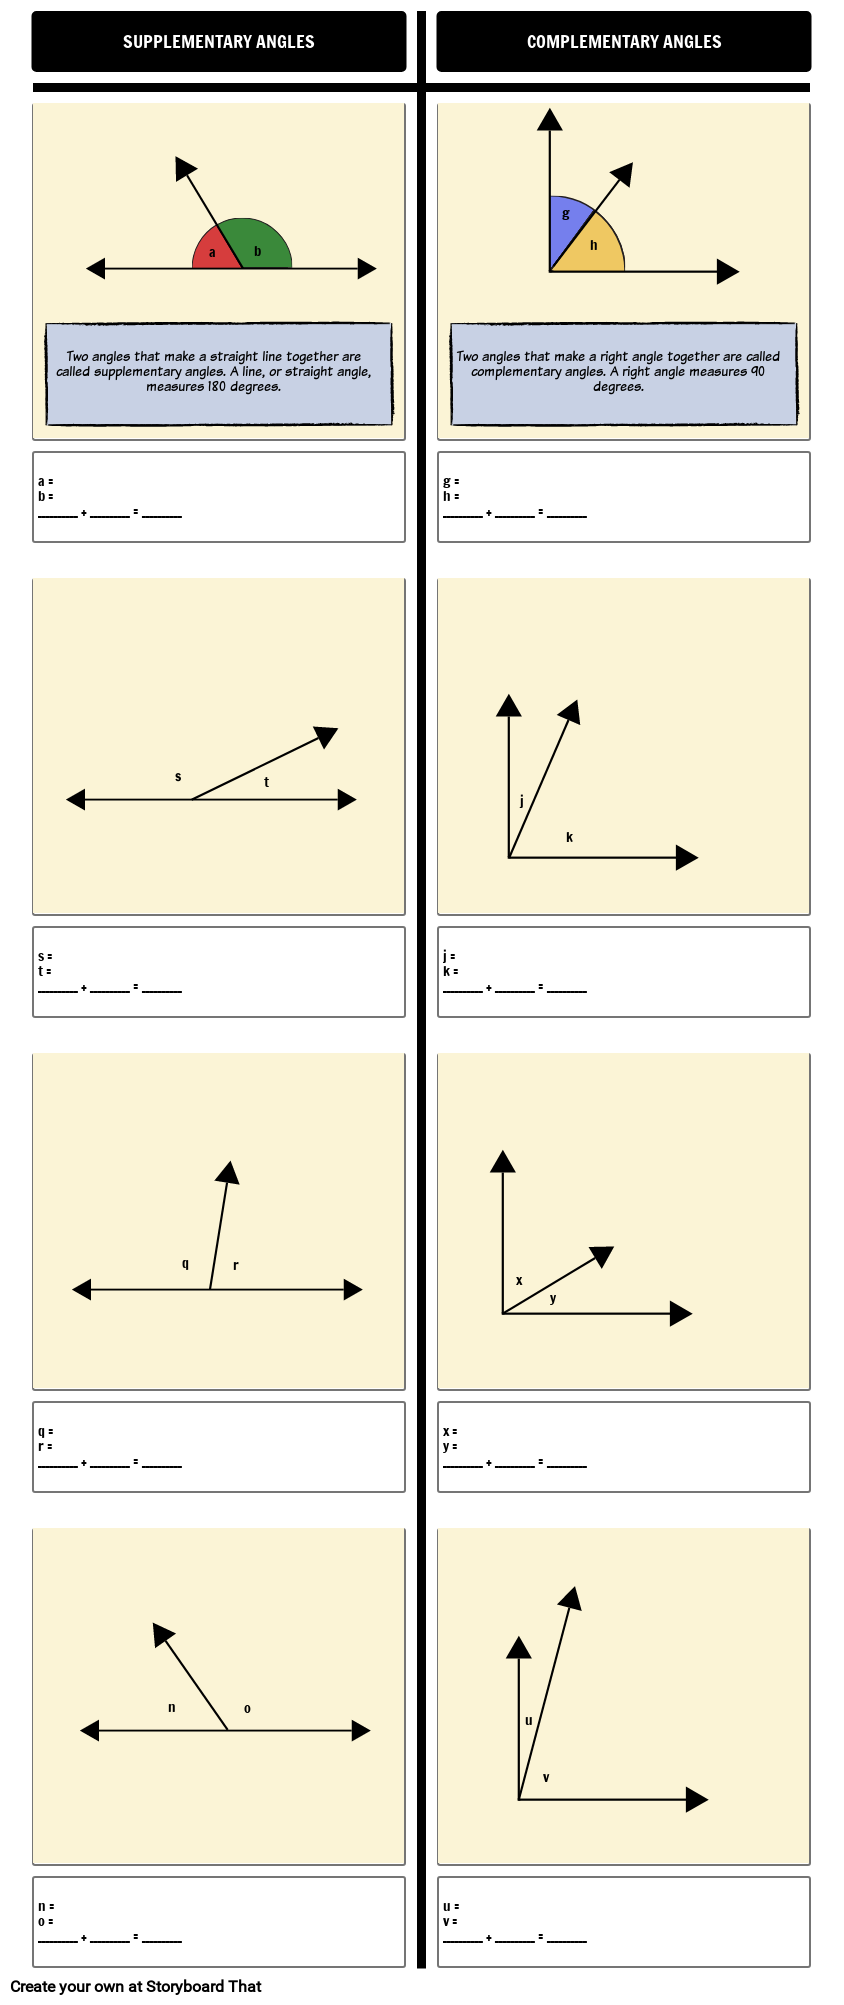 Supplementary and Complementary Angles Definitions